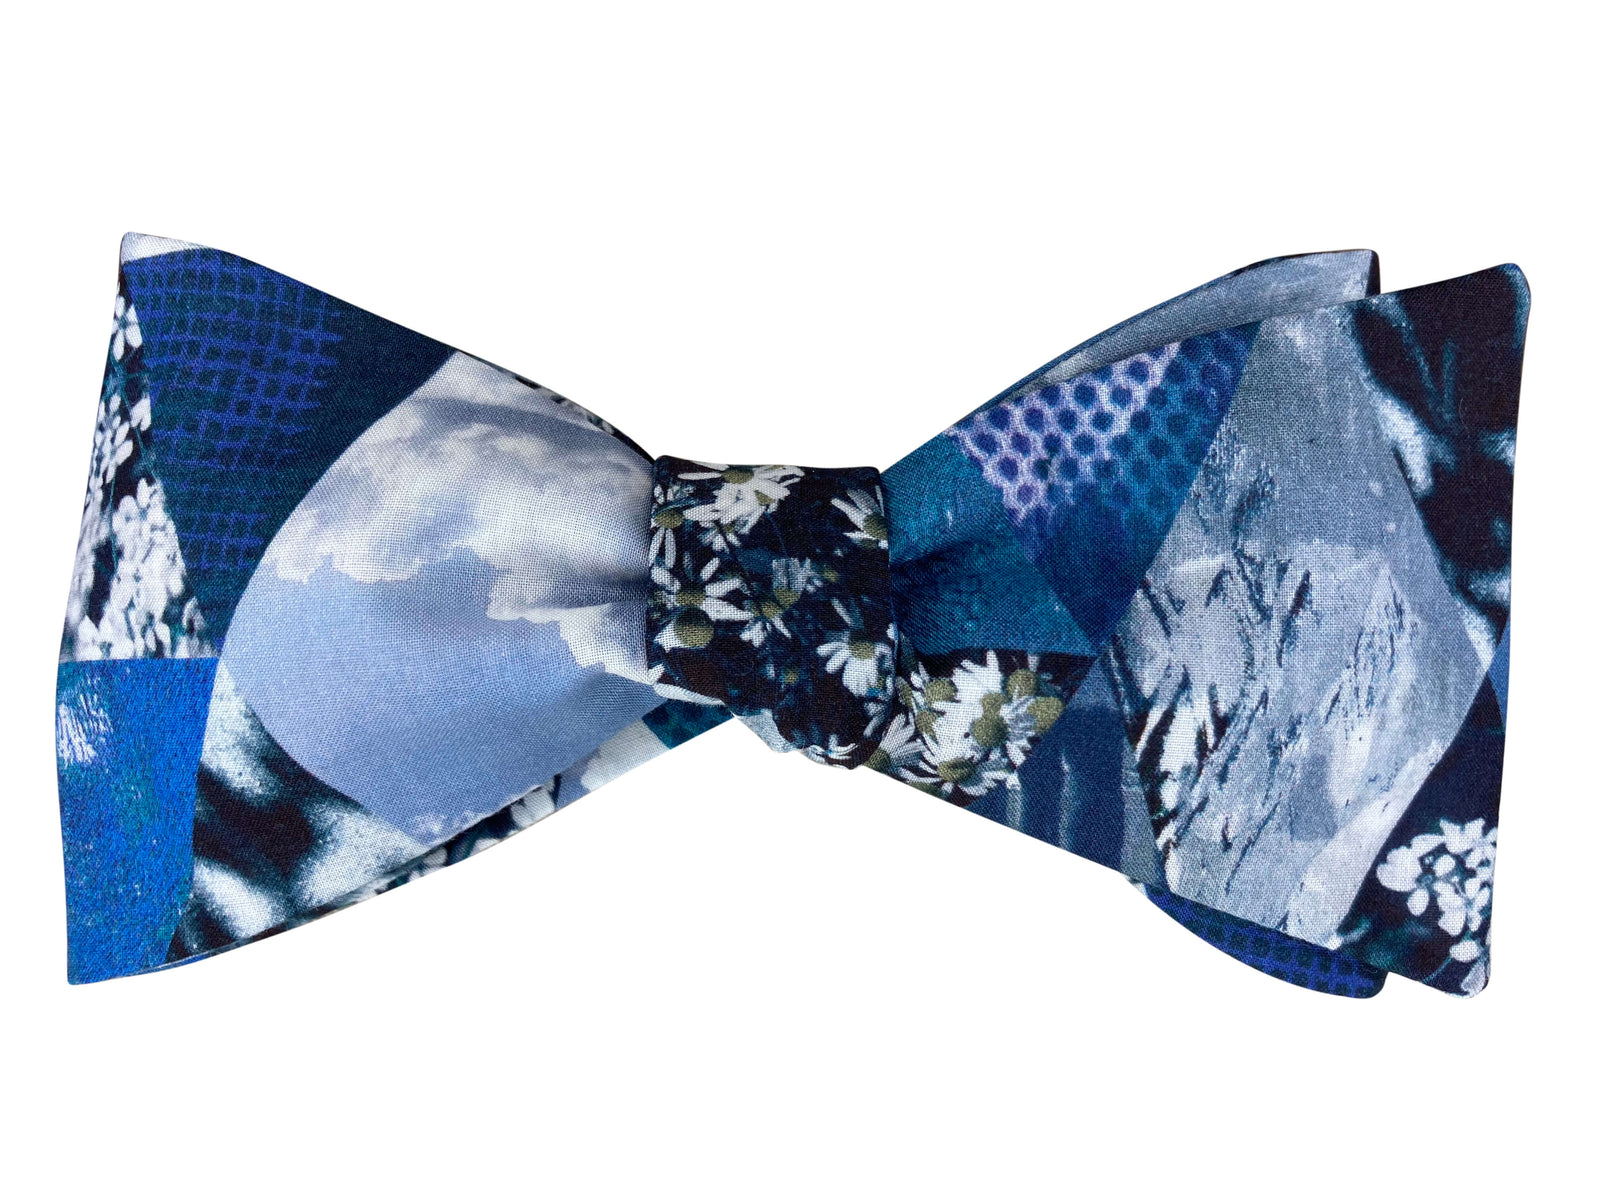 Parisian with Liberty, Blue Floral Bow Tie, Self-tie